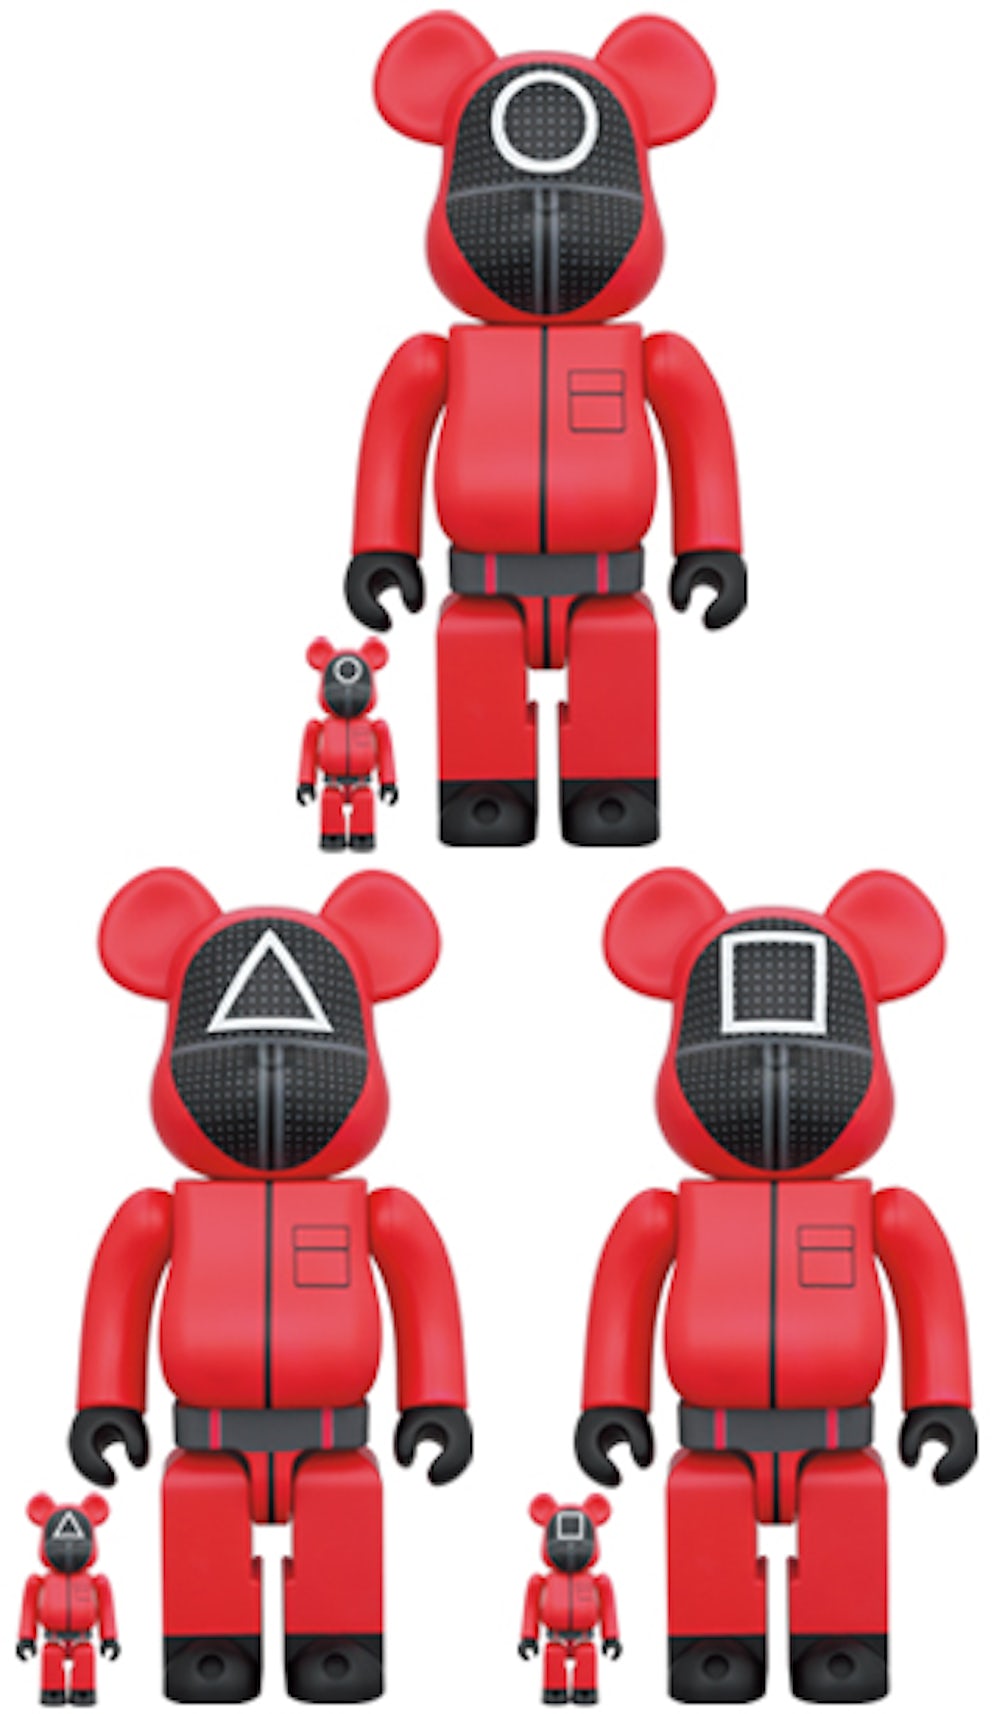 MEDICOM TOY: BAGS AND ACCESSORIES, MEDICOM TOY BEARBRICK SQUID GAME 1000%